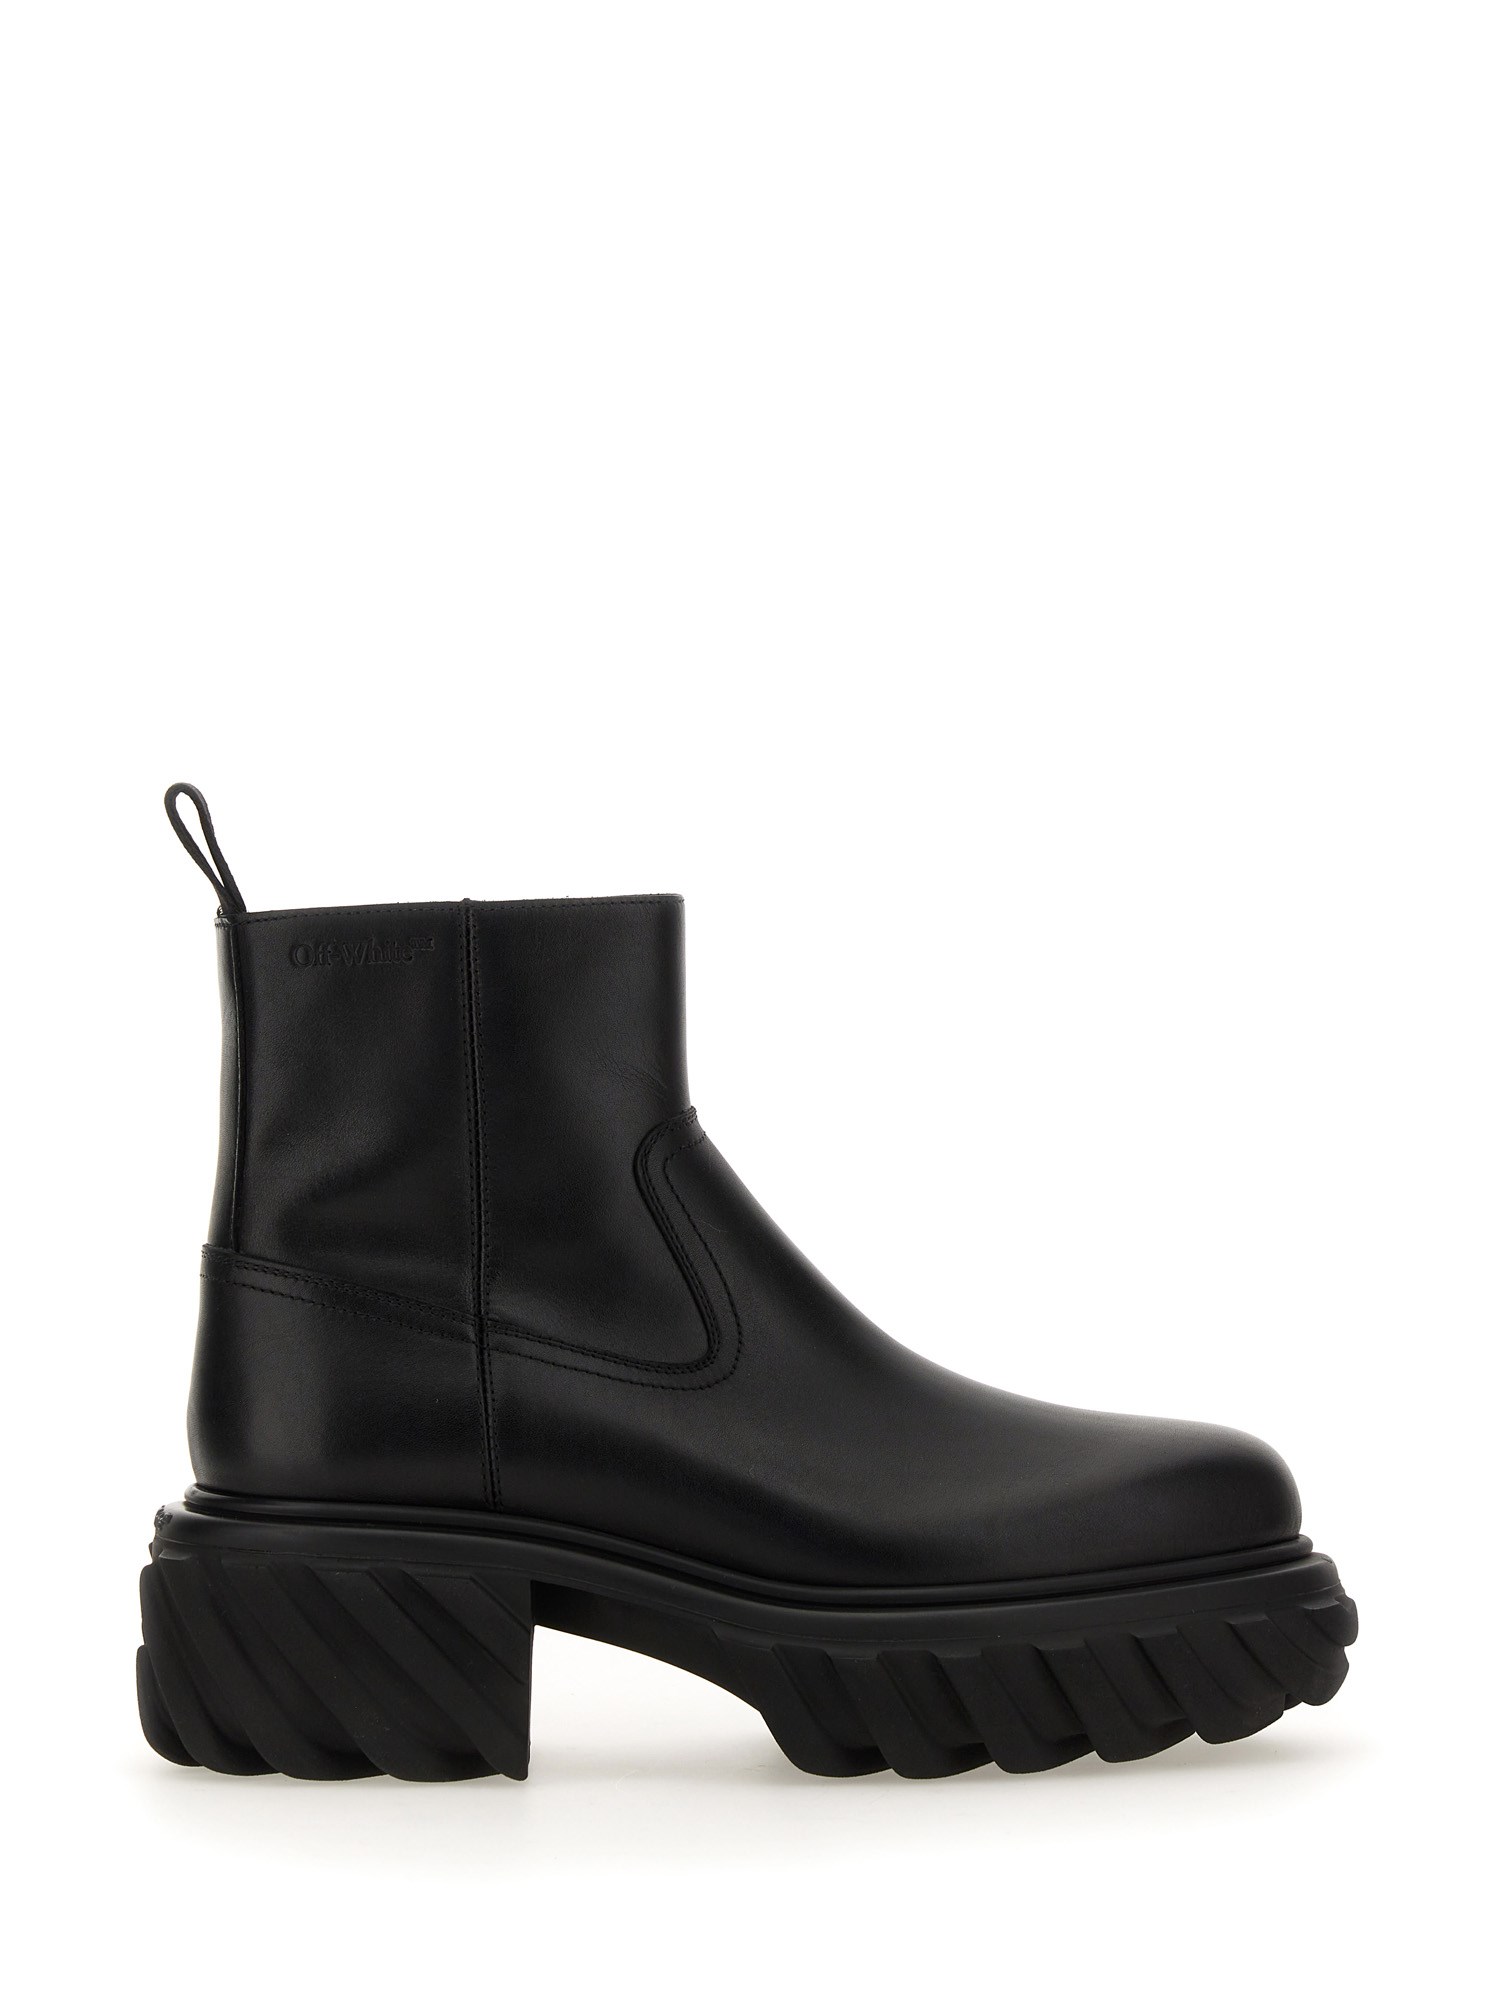 off-white leather boot